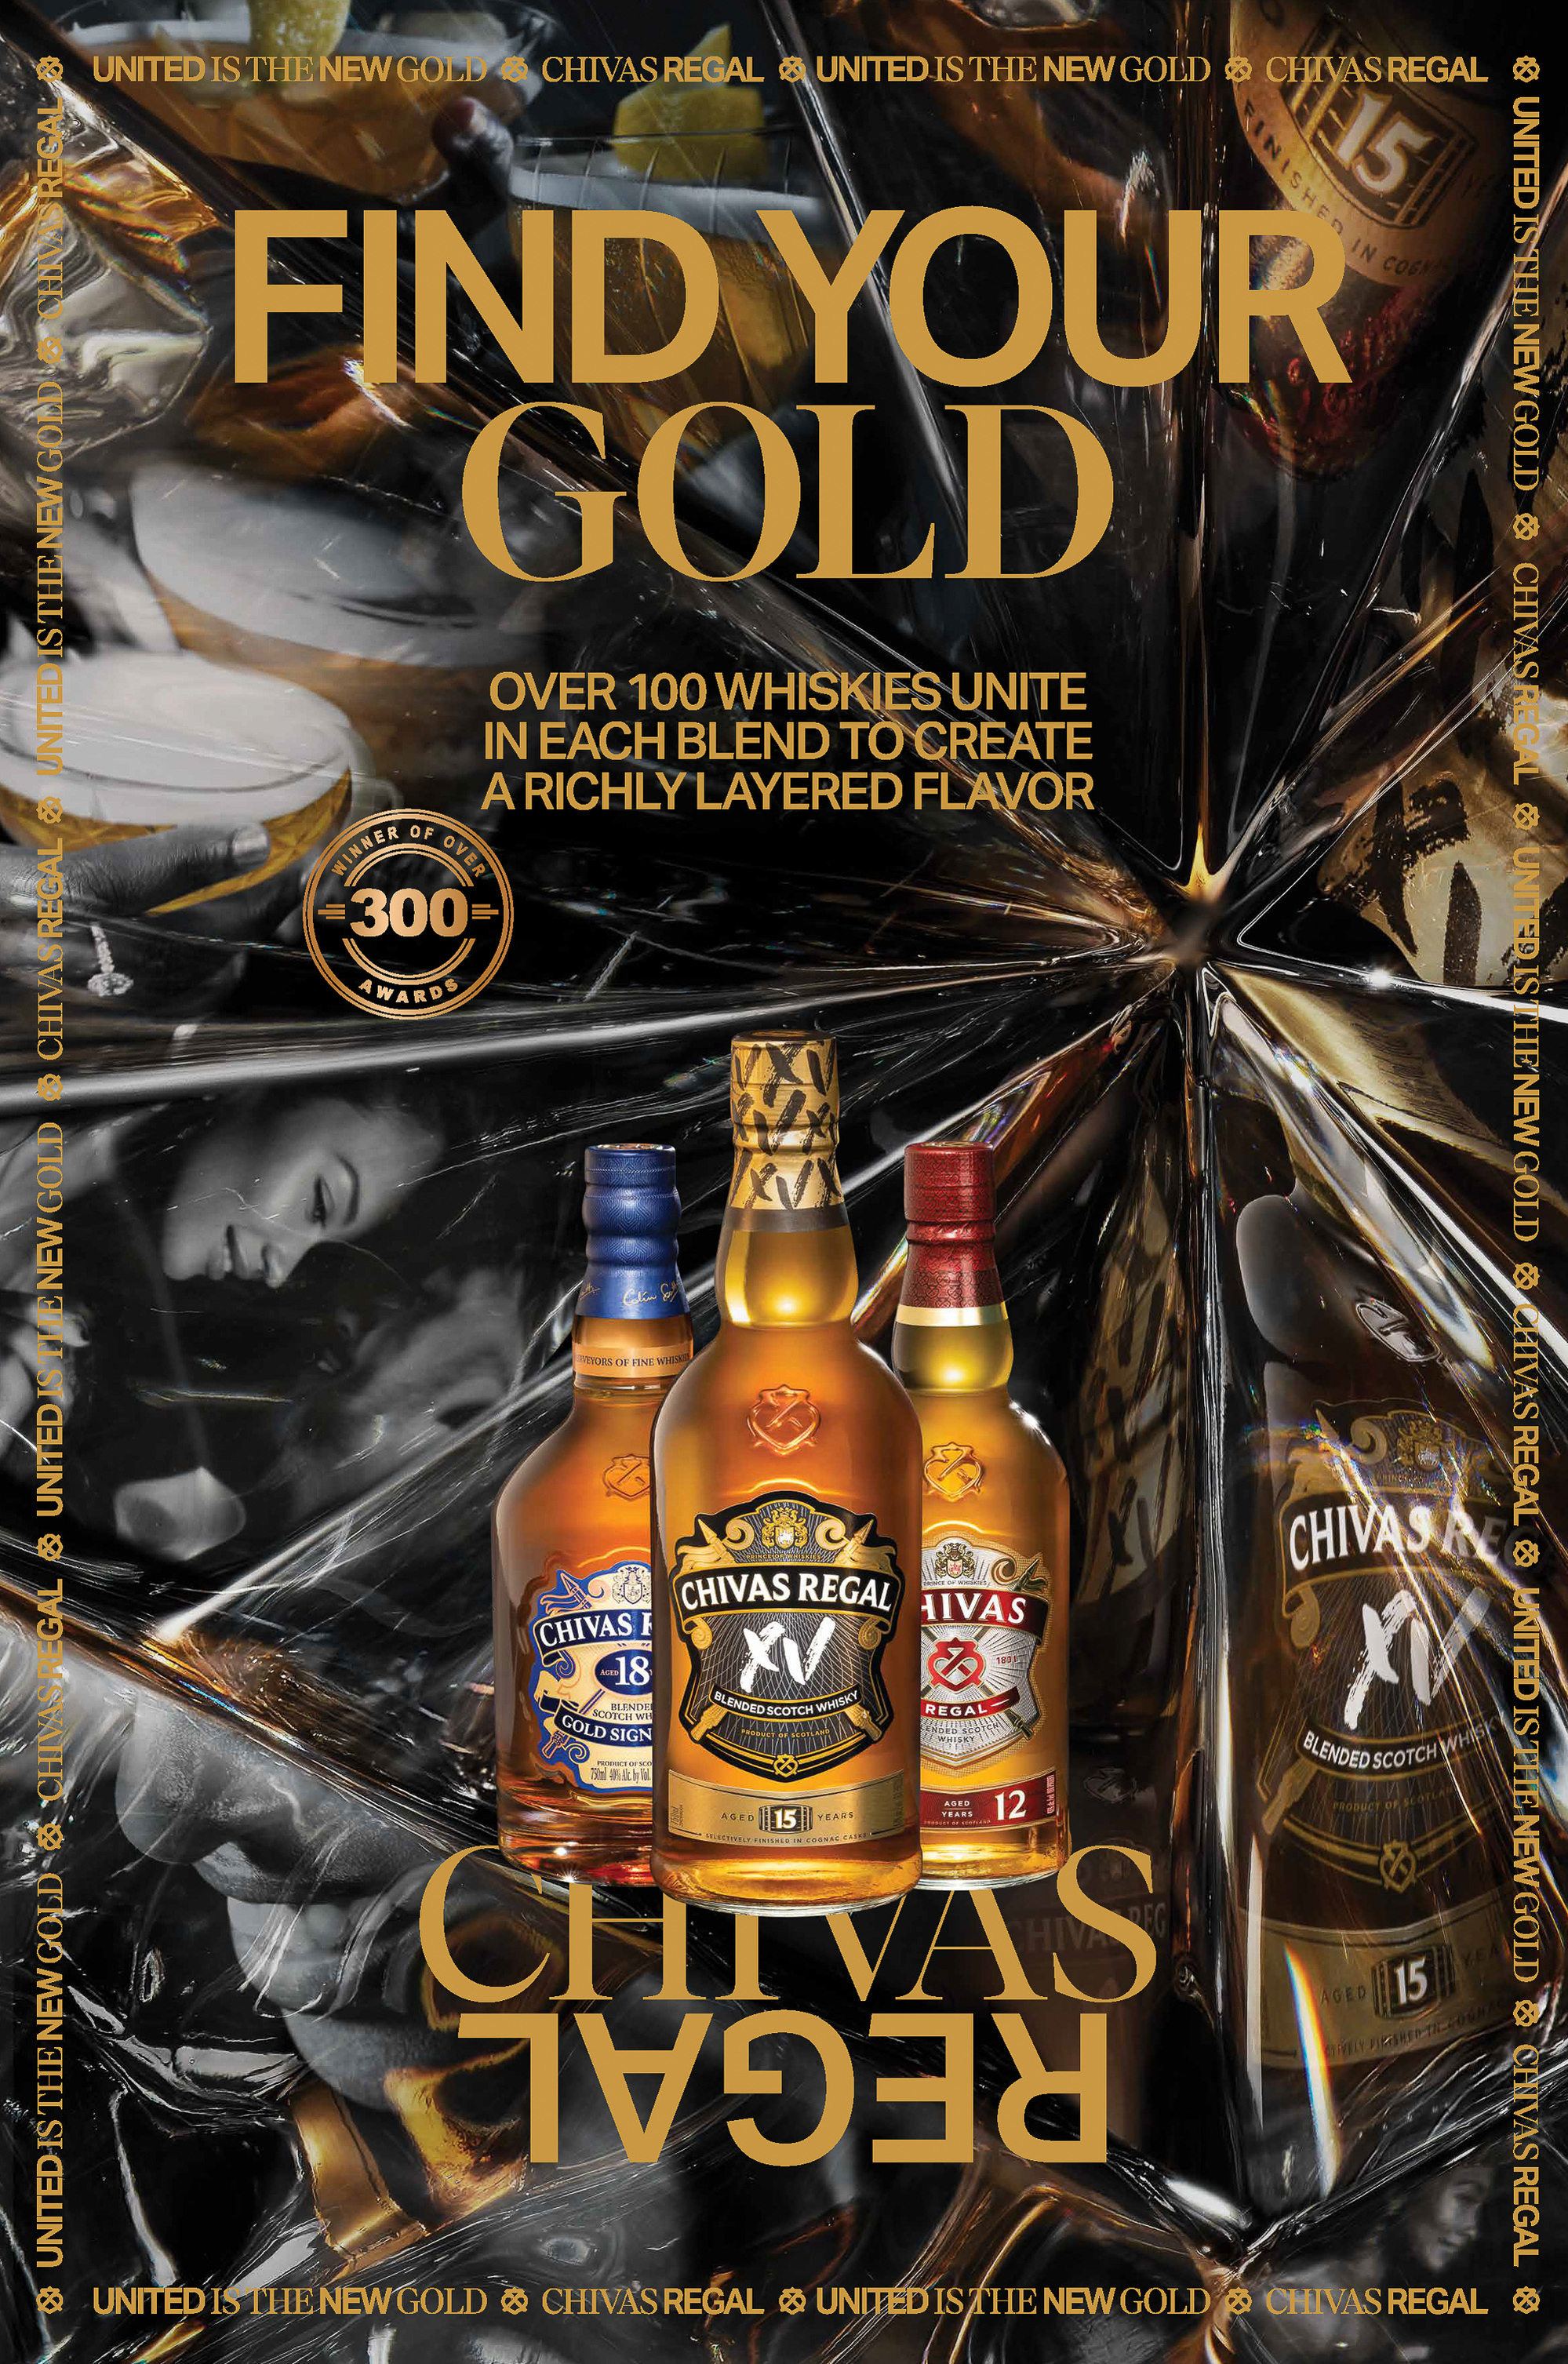 Chivas XV advertisement photographed by Timothy Hogan for Chivas Regal and Pernod Ricard in collaboration with McCann Advertising Agency, London.